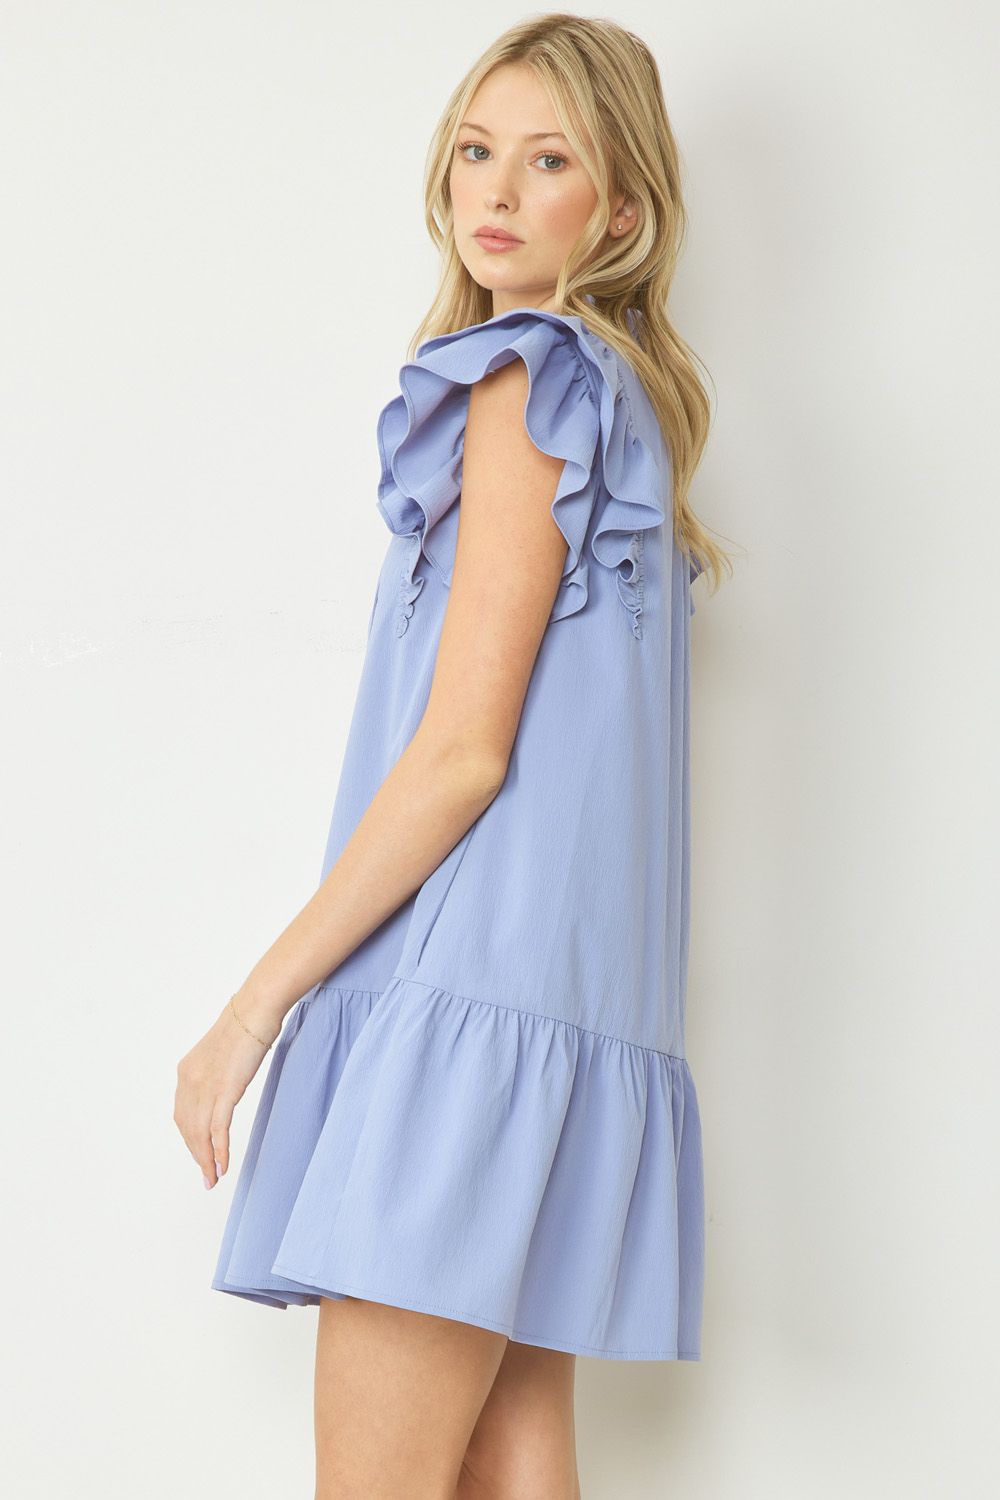 V-neck Ruffle Sleeve tiered mini dress featuring self tie closure at front neck - 2 Colors